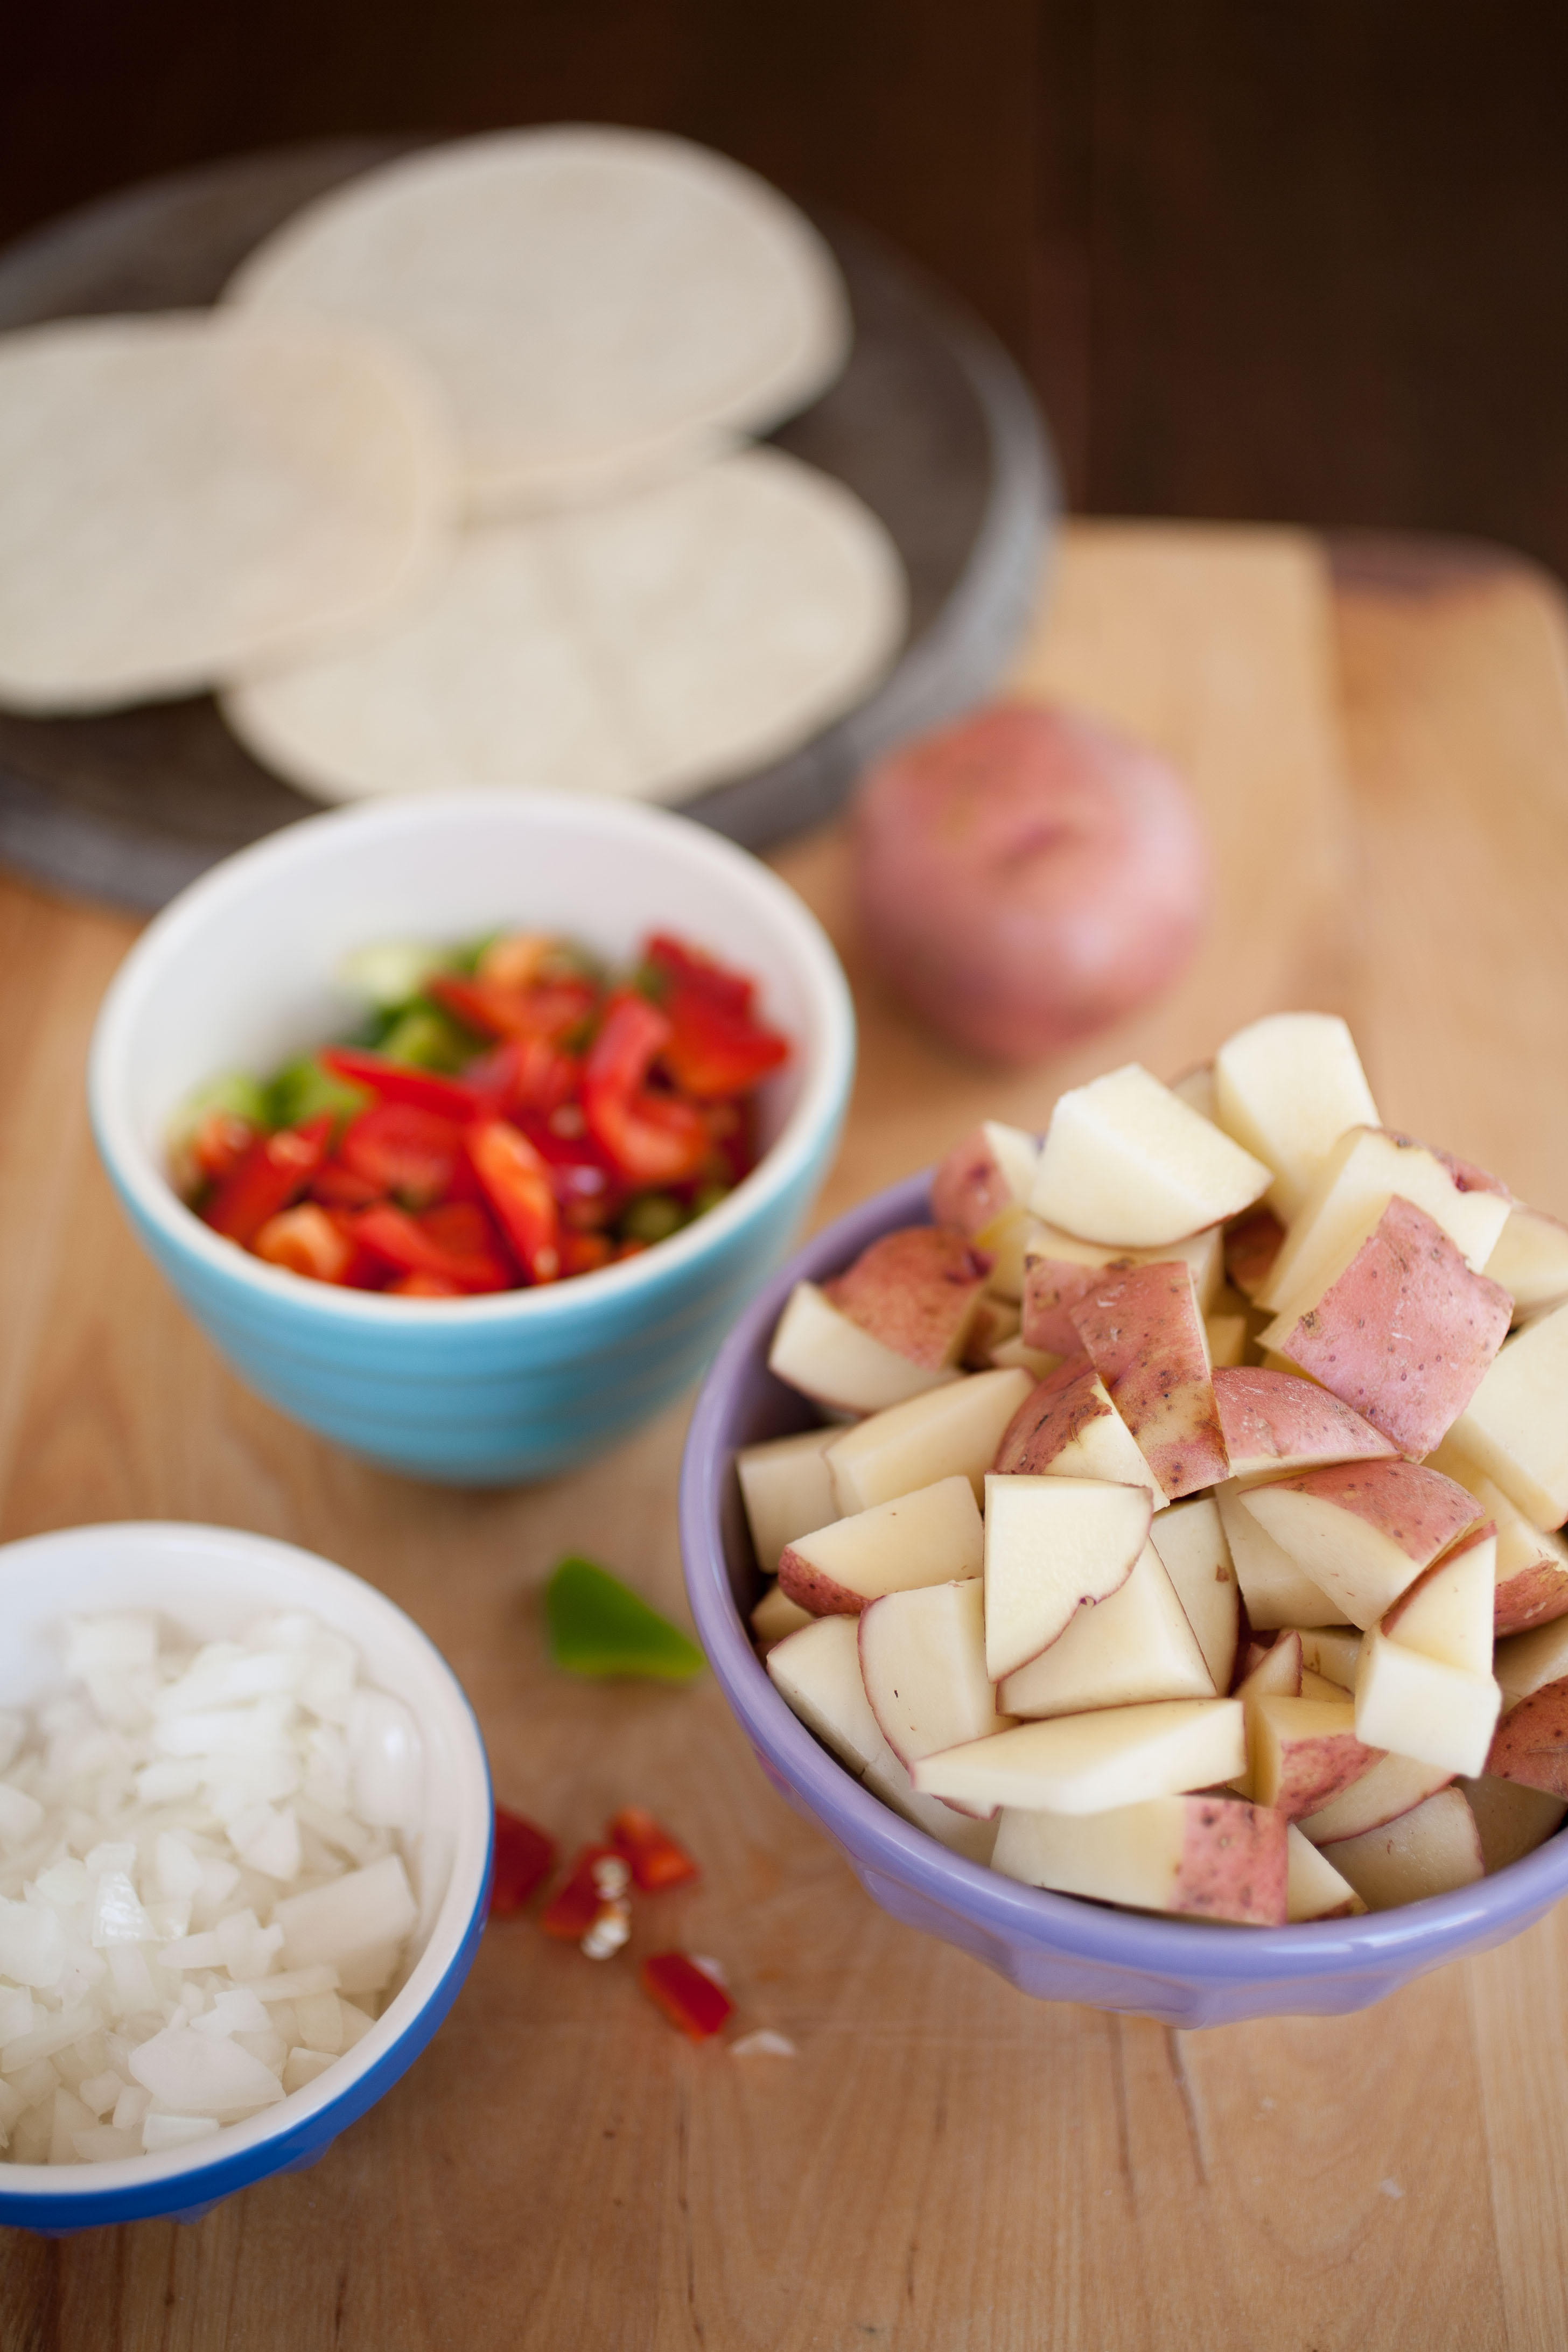 red potatoes, peppers, and onions in bowls